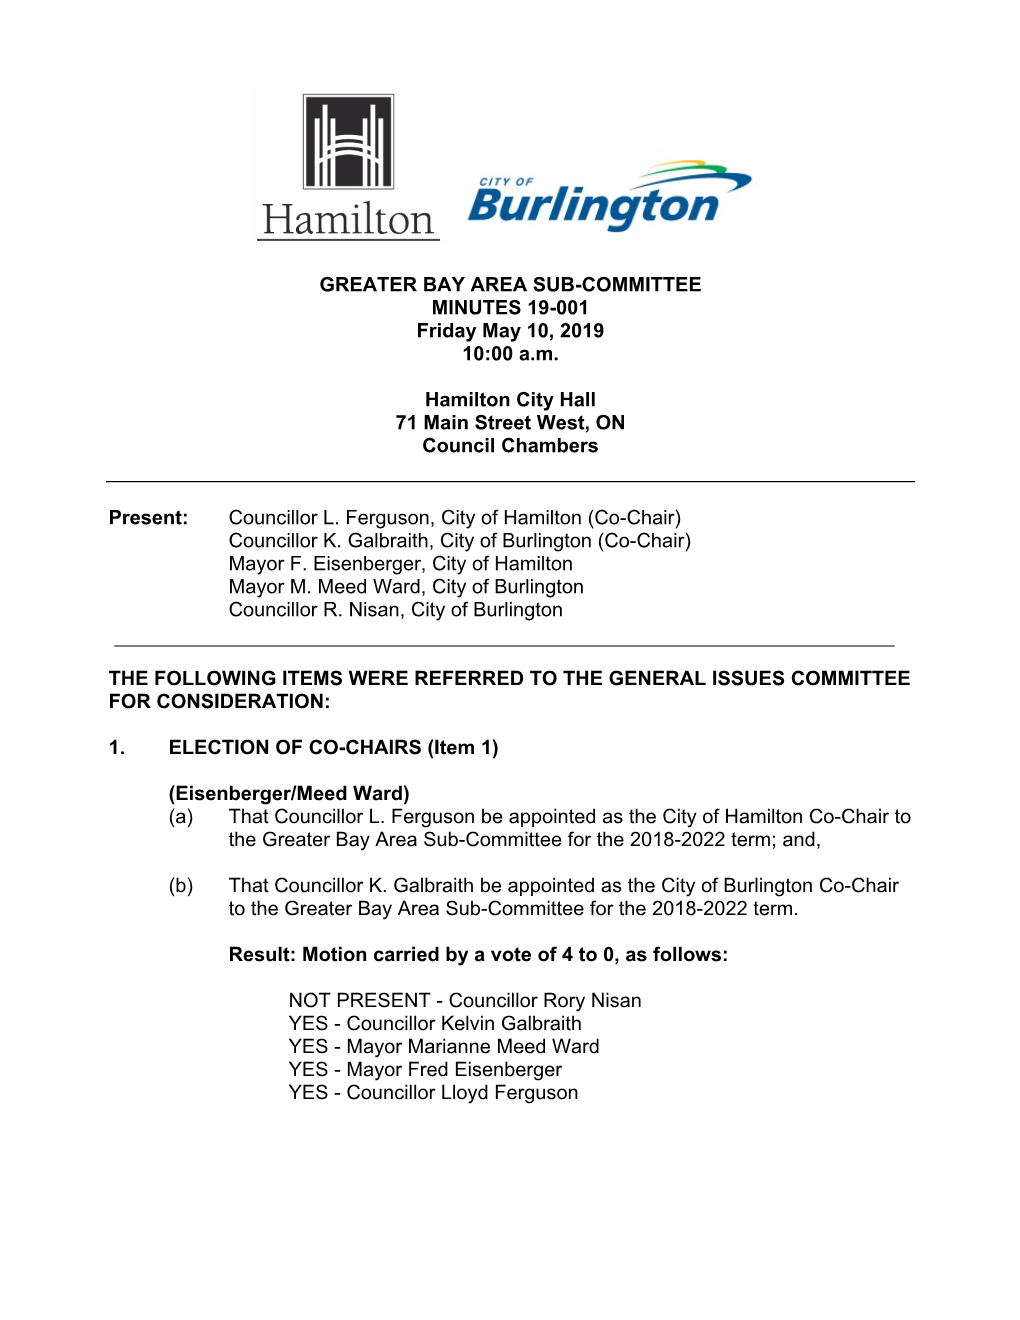 GREATER BAY AREA SUB-COMMITTEE MINUTES 19-001 Friday May 10, 2019 10:00 A.M